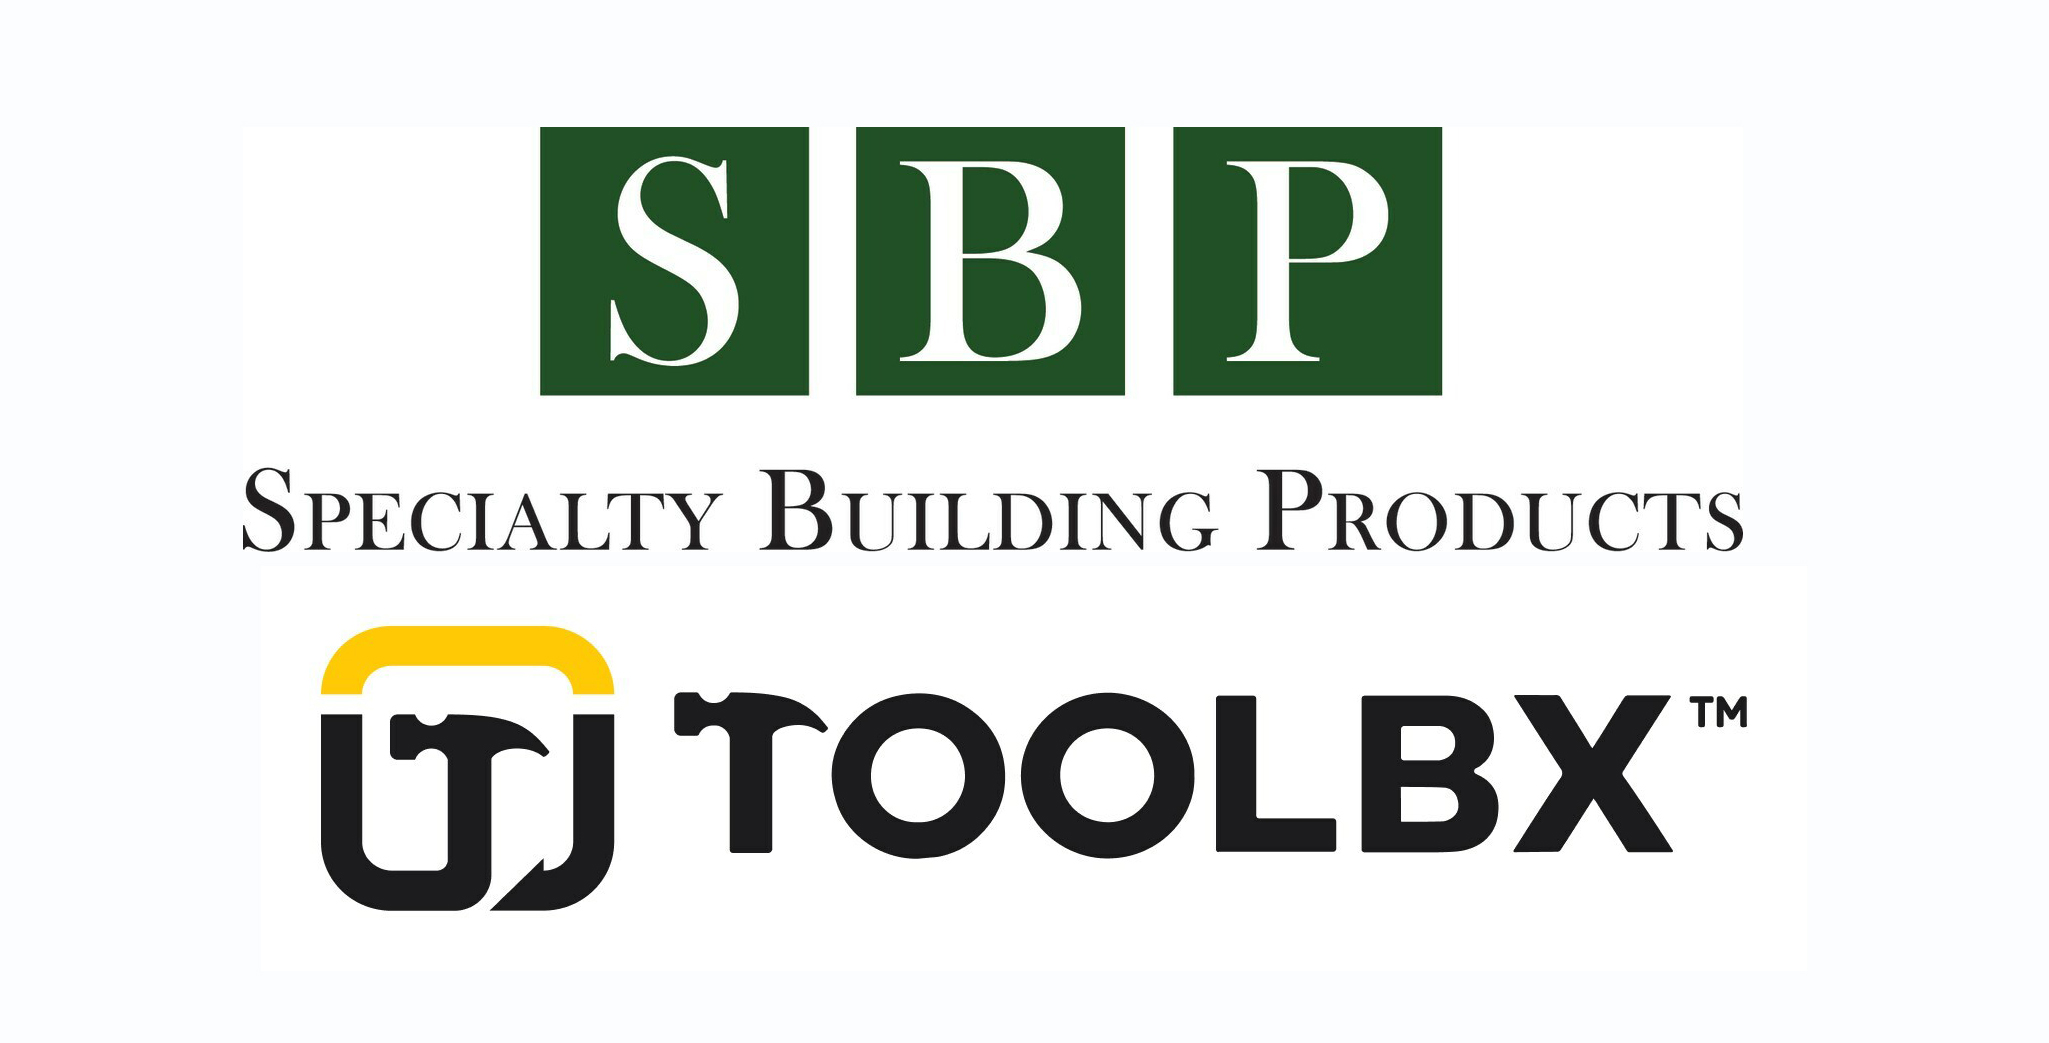 Specialty Building Products